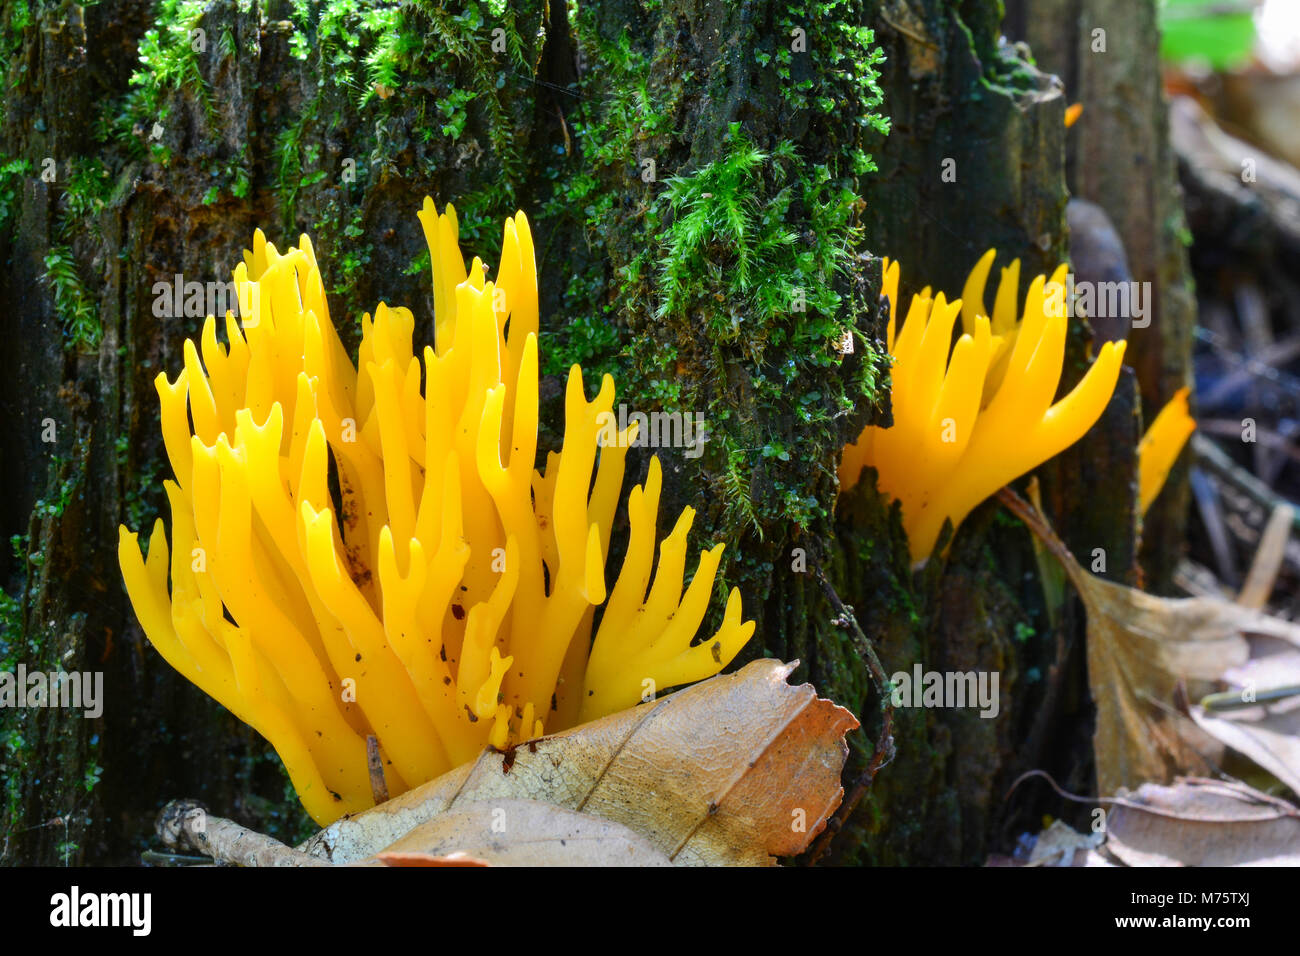 Calocera viscosa or Yellow Stagshorn mushrooms in natural habitat, on the forest soil and rotten stump, close up view Stock Photo